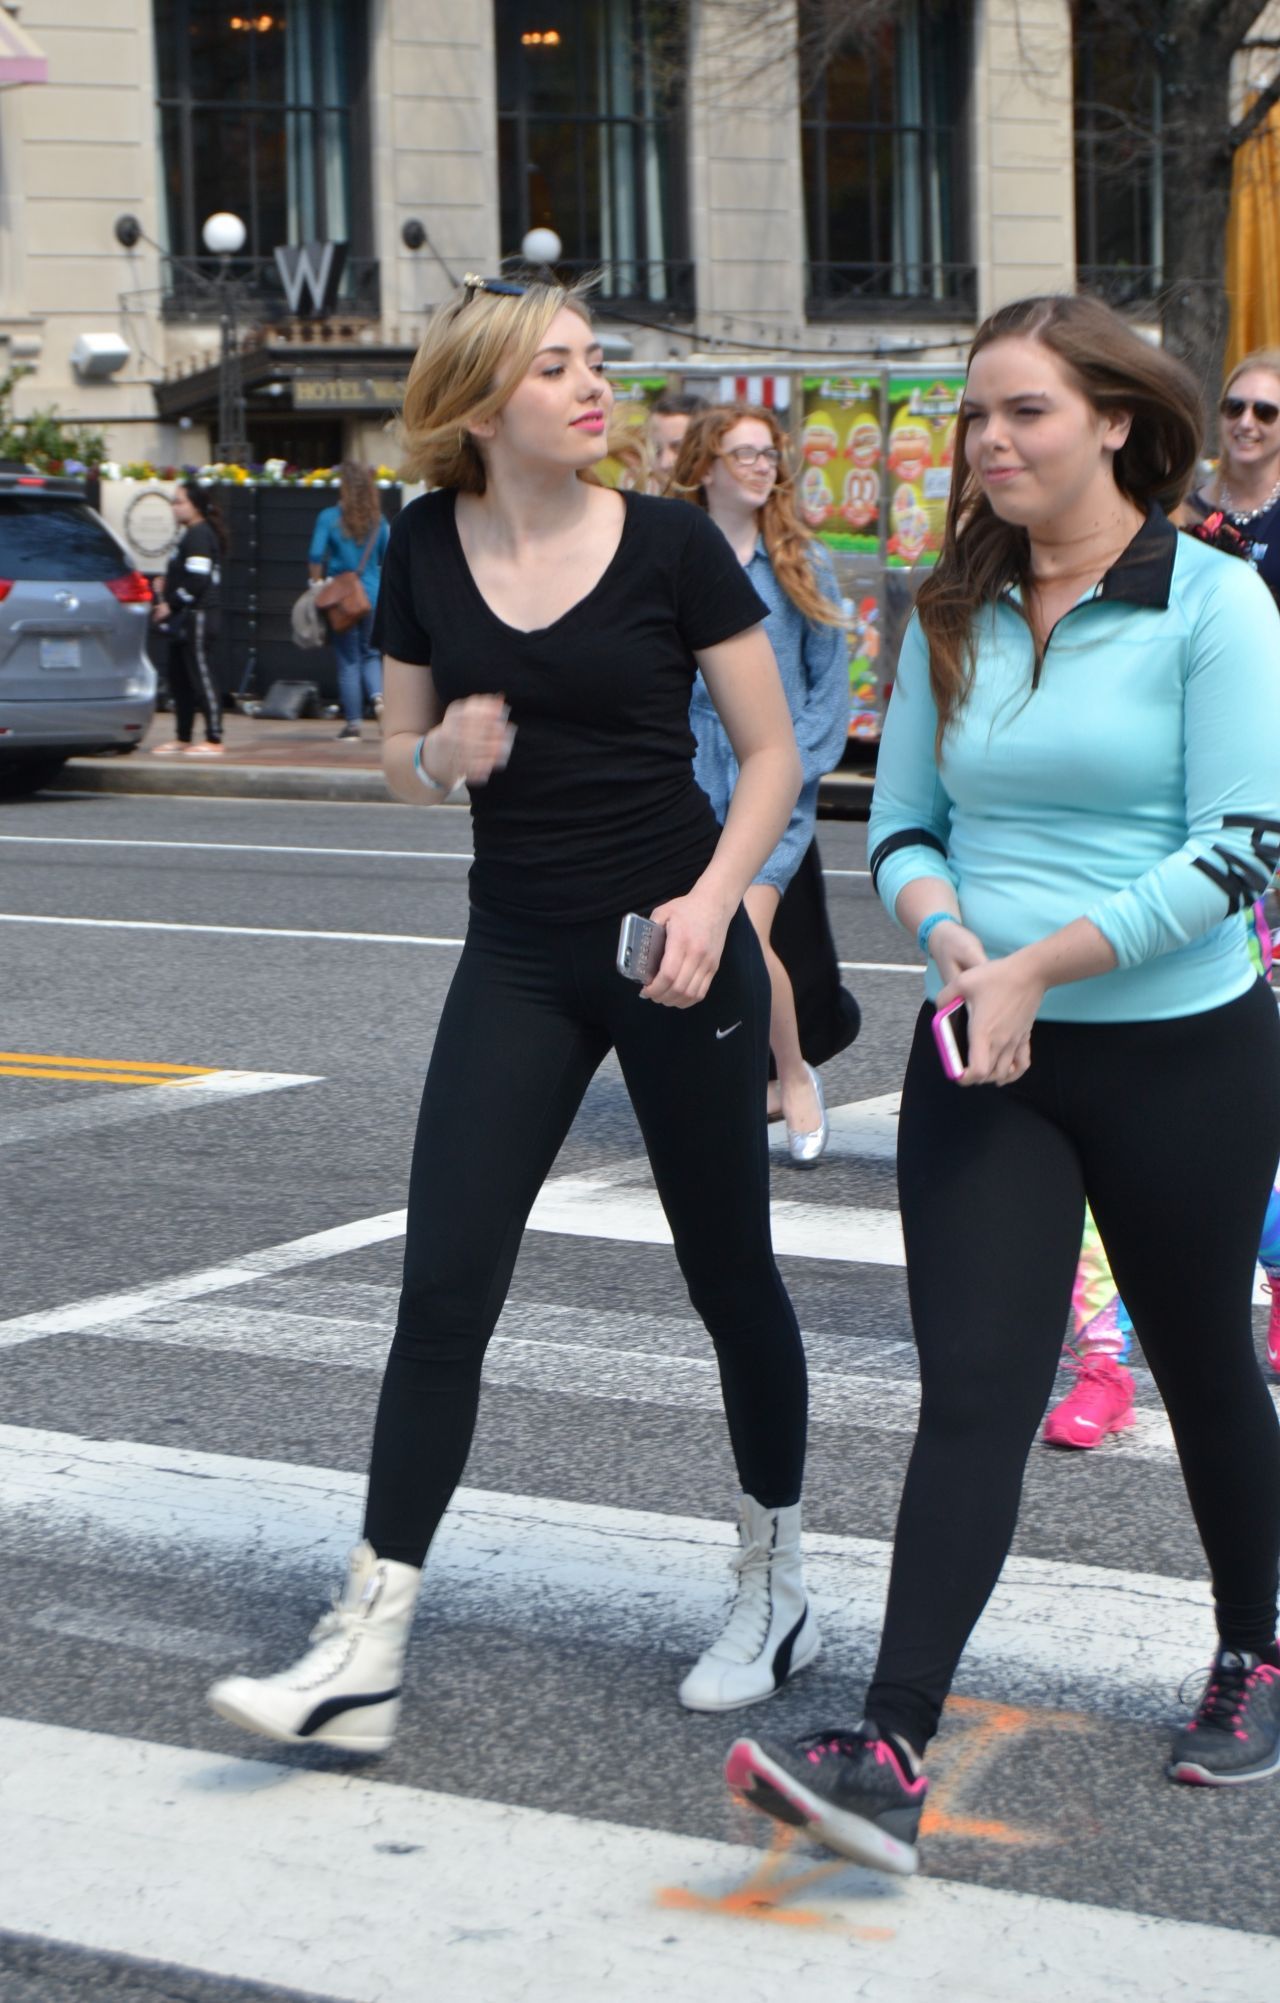 adam allanson recommends peyton list in yoga pants pic